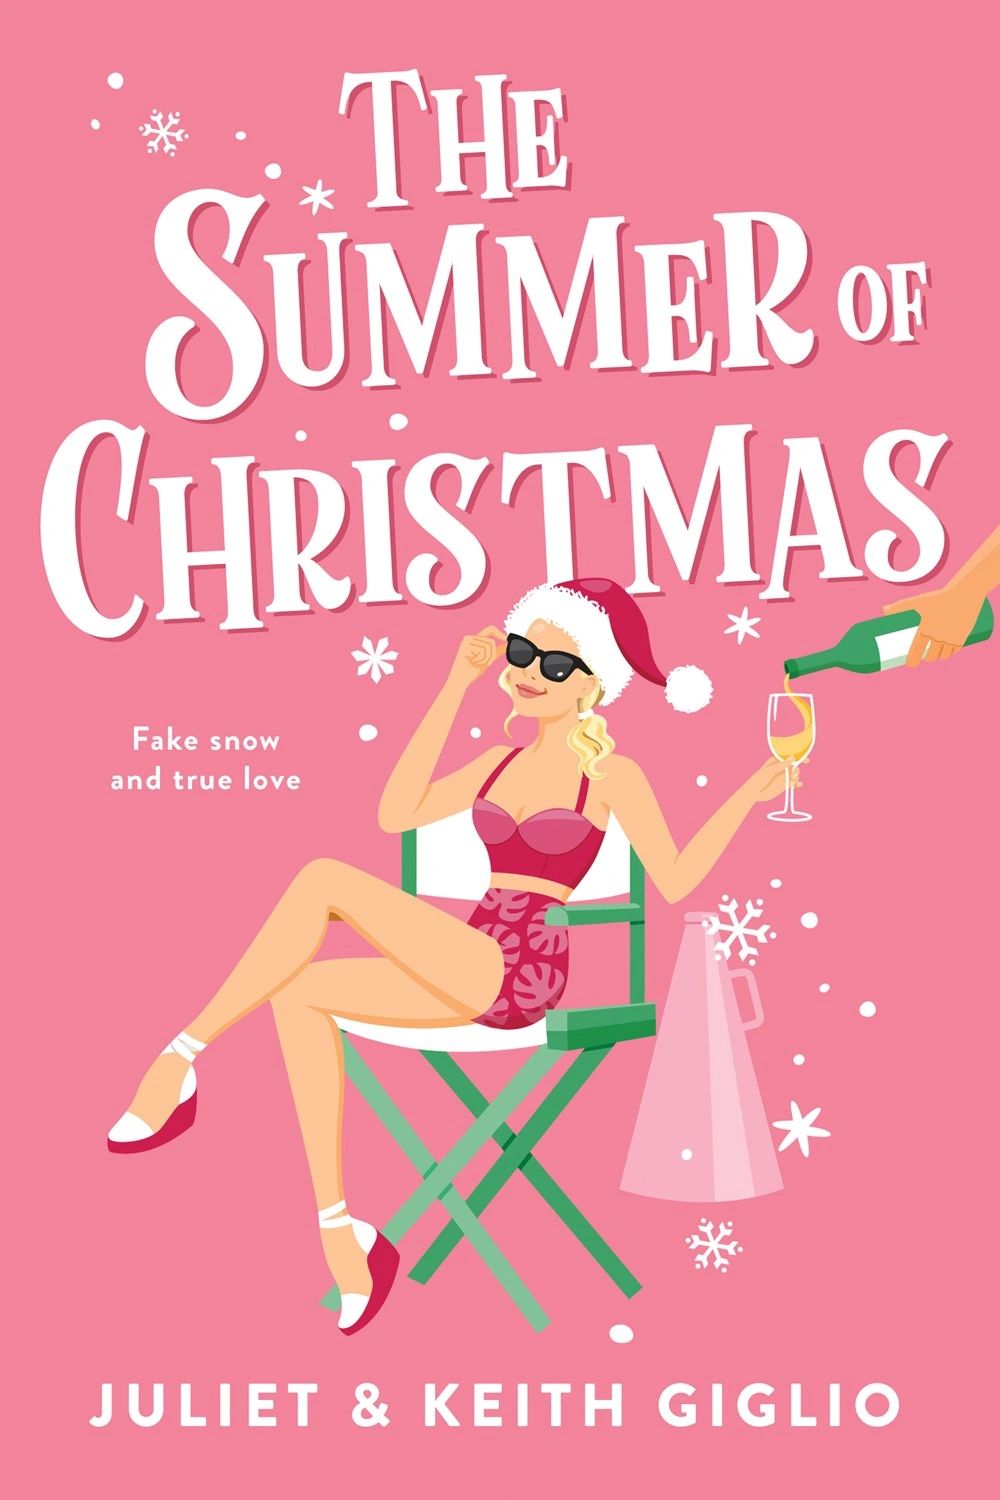 The Summer of Christmas by Juliet & Keith Giglio book cover illustration by Monika Roe illustration.